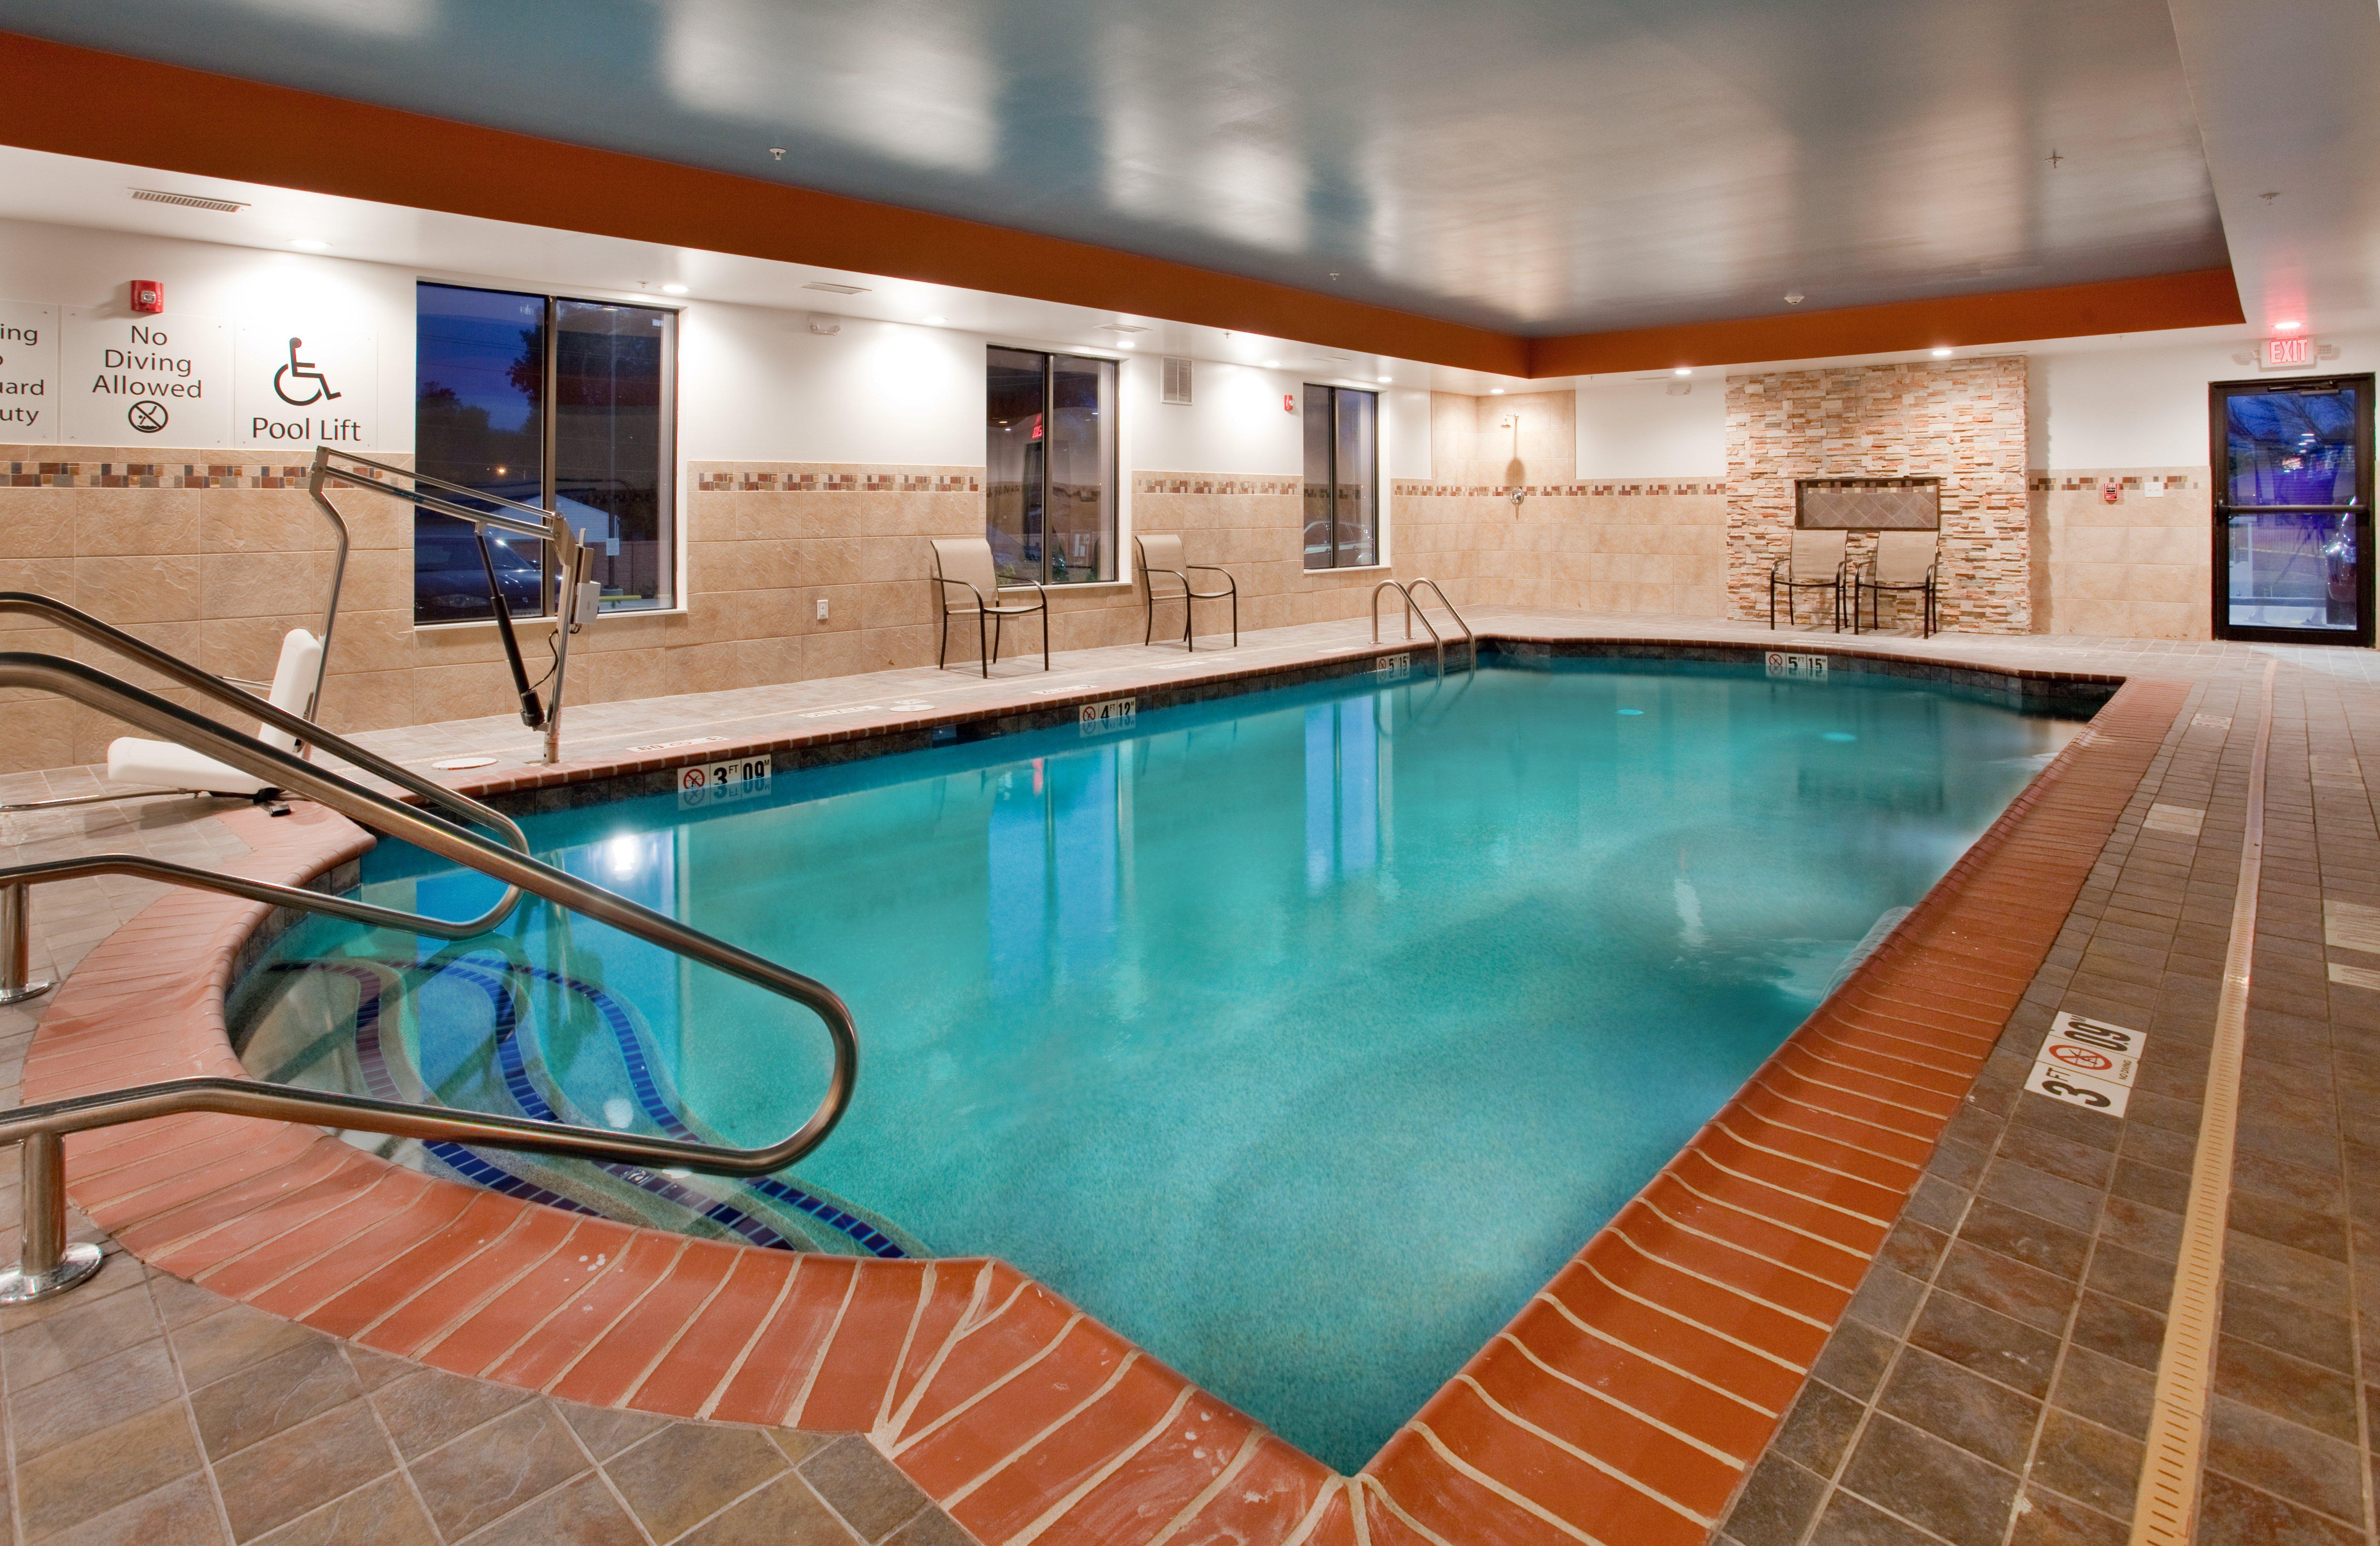 HOTEL HOLIDAY INN EXPRESS & SUITES ST LOUIS AIRPORT SAINT LOUIS, MO 2*  (United States) - from US$ 149 | BOOKED